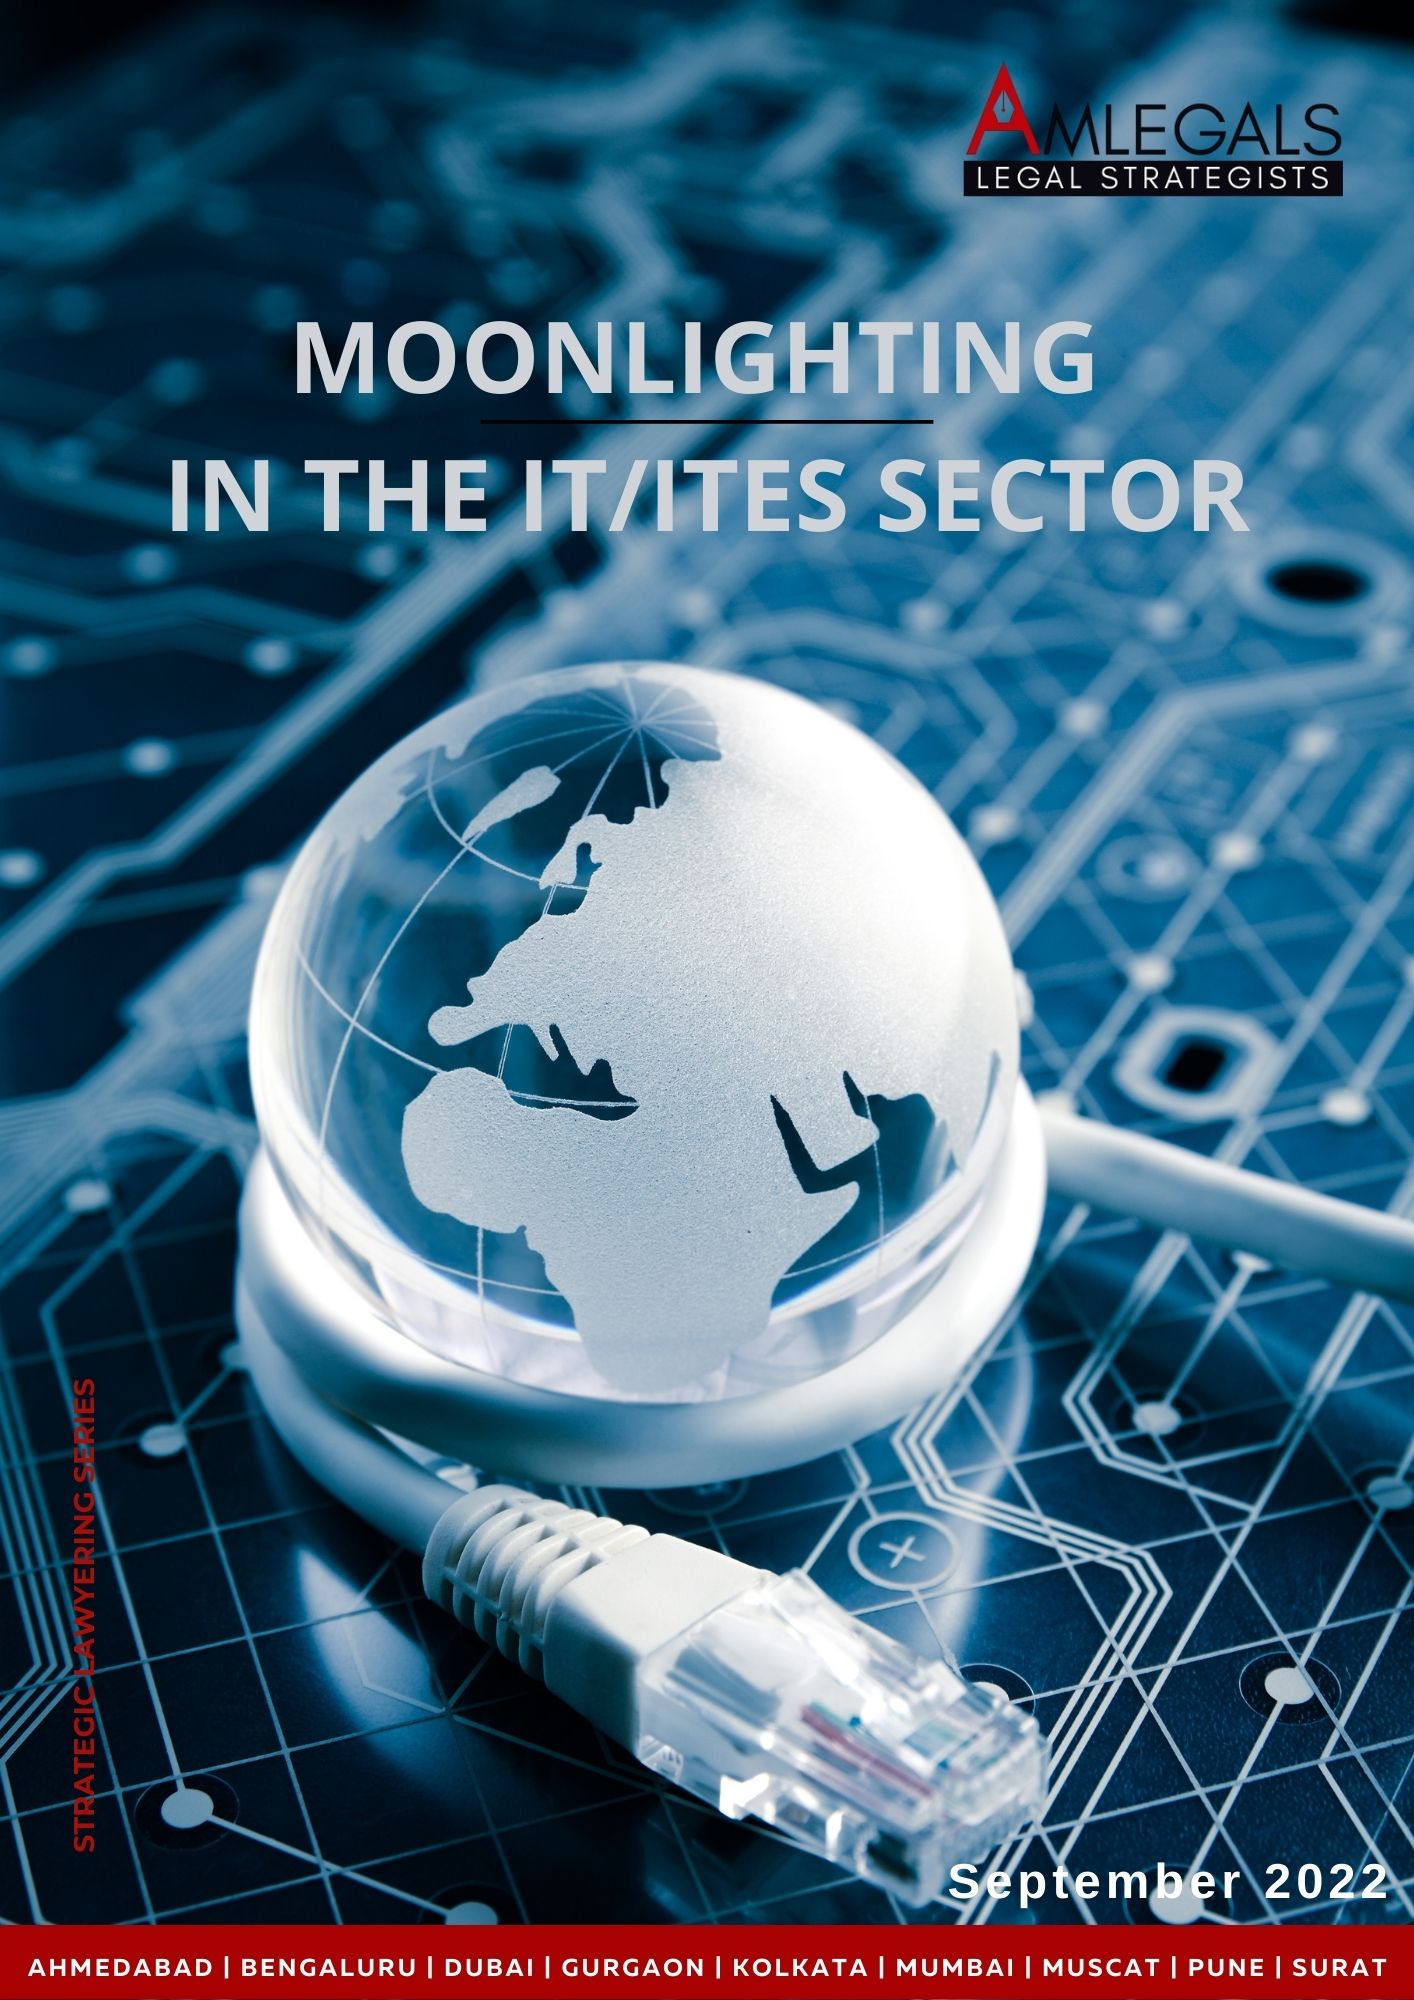 Moonlighting in the IT/ITES Sector